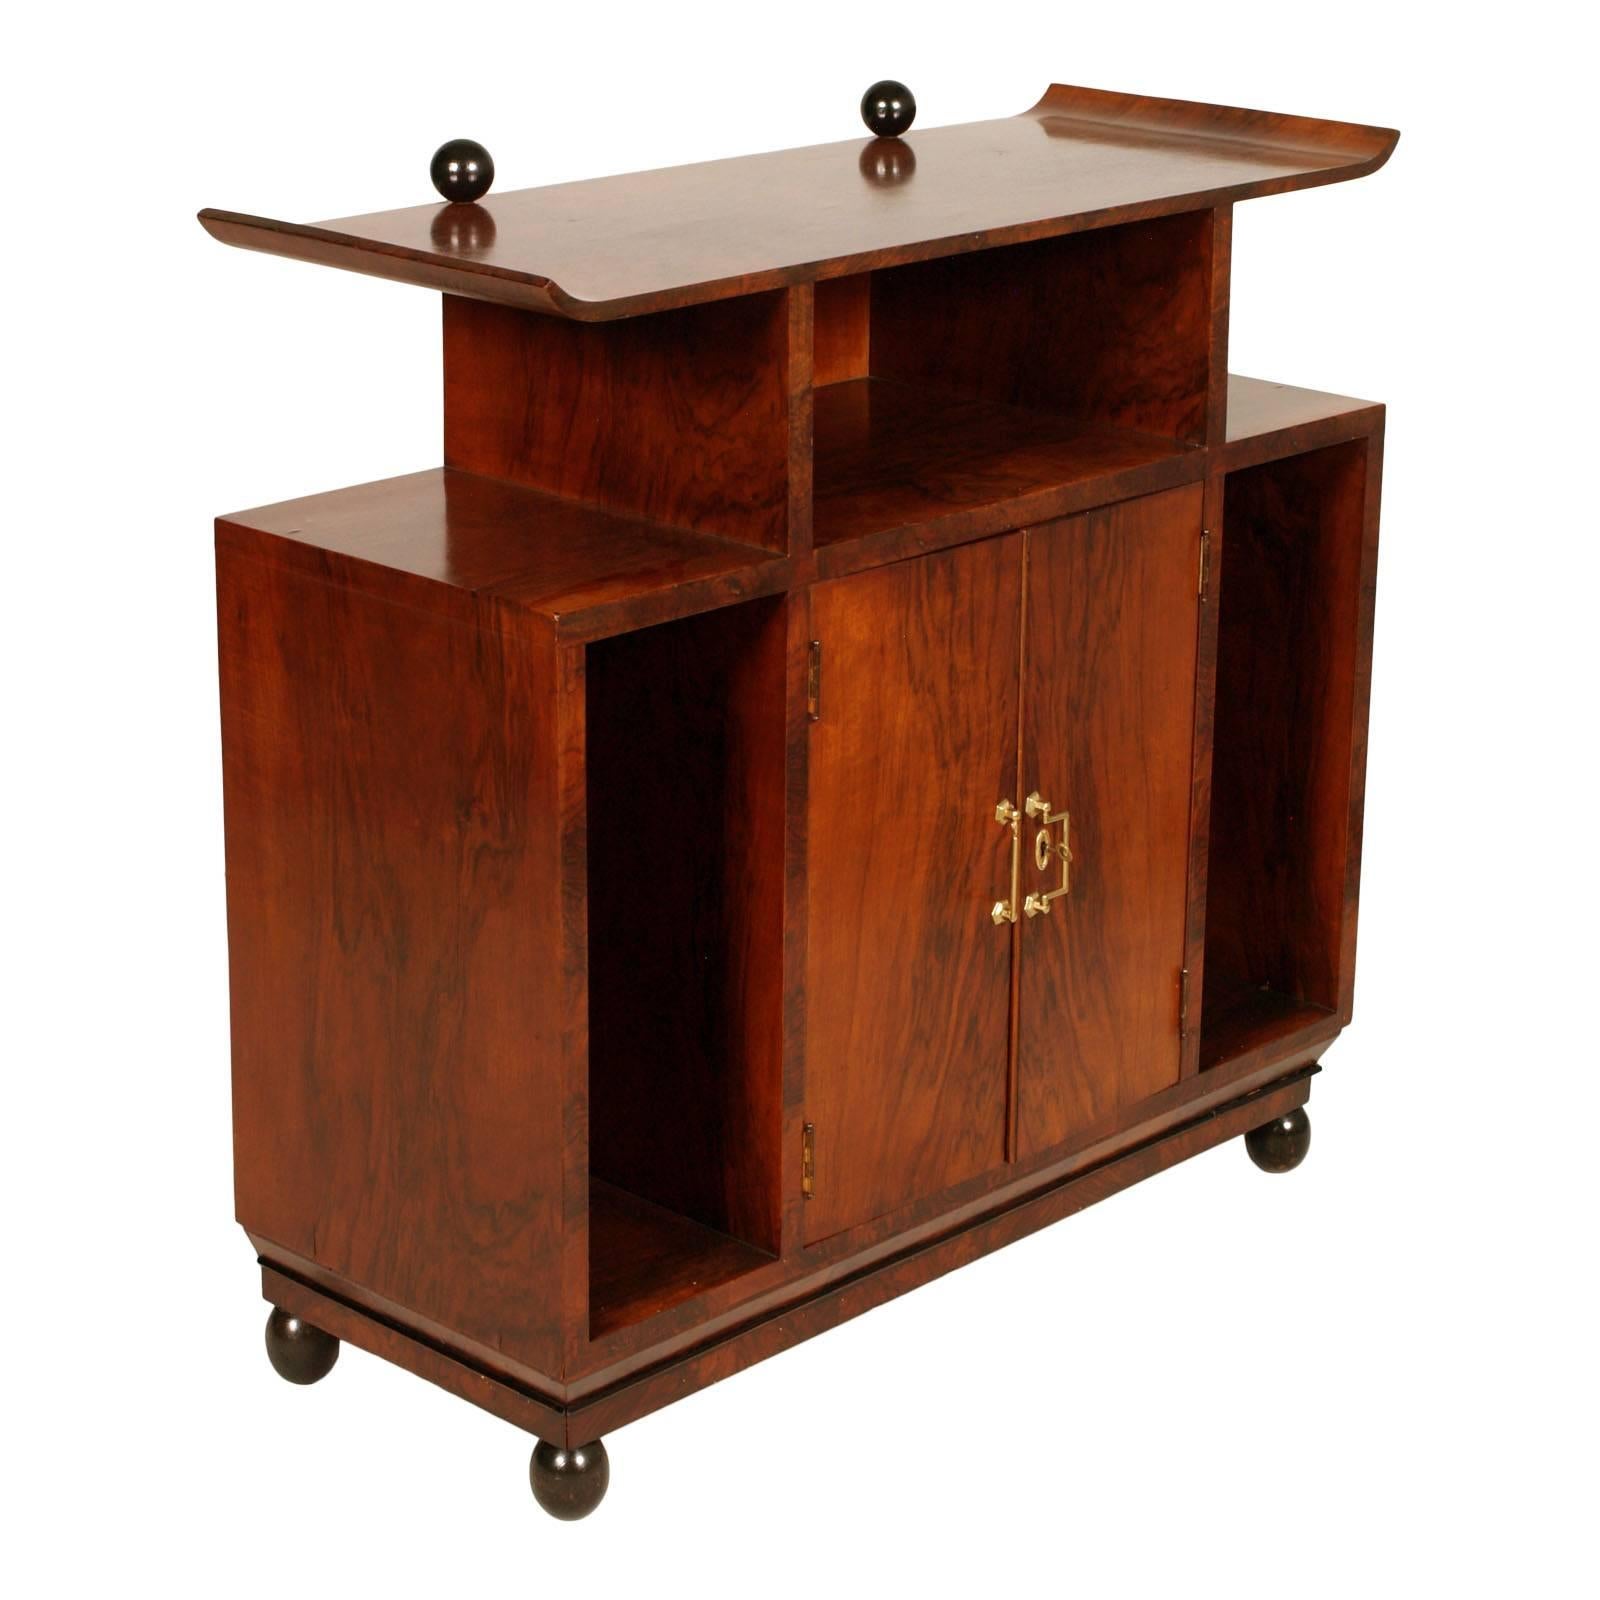 Art Deco sideboard or console or buffet, style chinoiserie by Osvaldo Borsani in veneer burl walnut. Handles in gilded brass; furniture restored and polished to wax

Measures in cm H 98 x W 100 x D 39.

MEASURES INTERIORS STORAGE
open storage:   